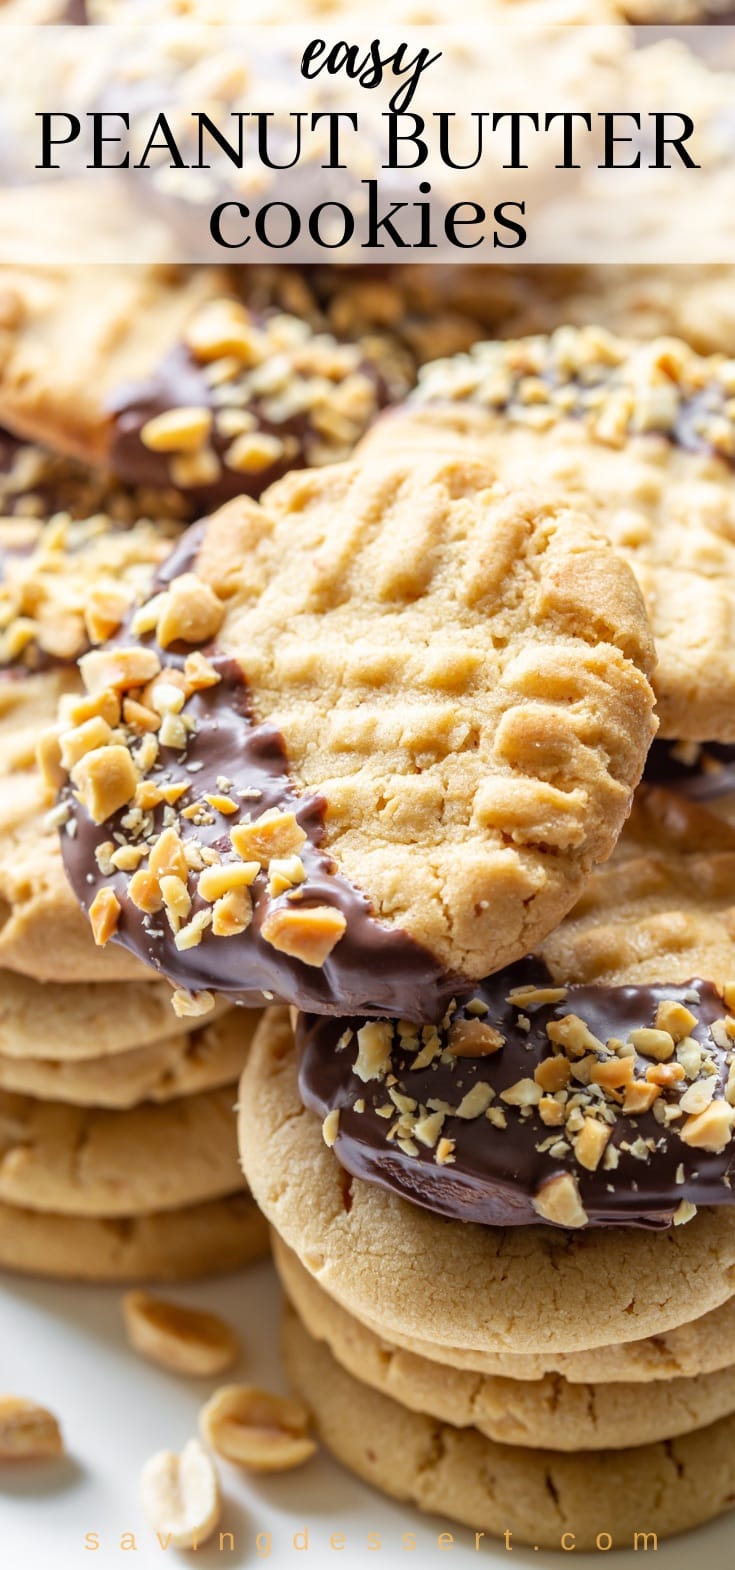 a stack of chocolate dipped peanut butter cookies sprinkled with chopped, salted peanuts